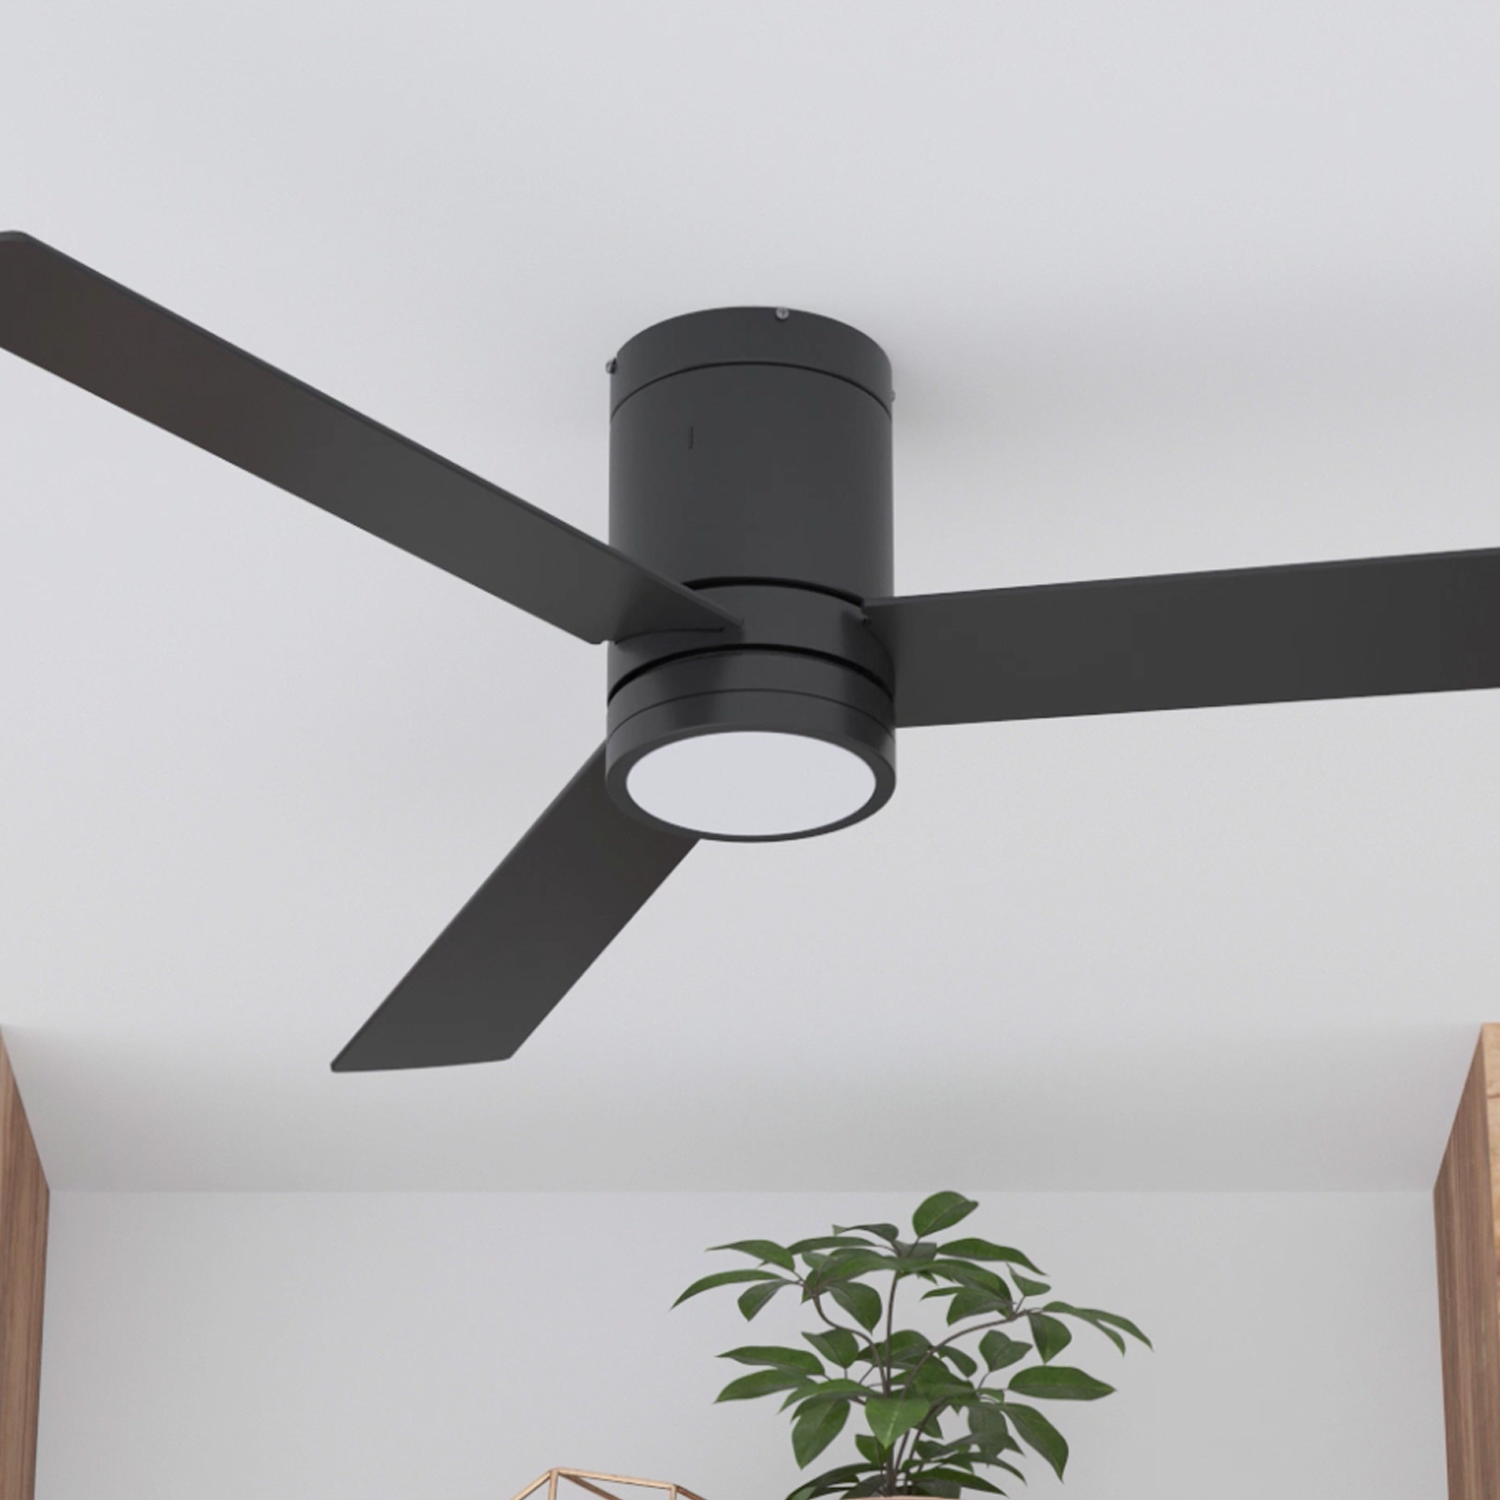 52 Inch Espy, Matte Black, Remote Control, Ceiling Fan by Prominence Home